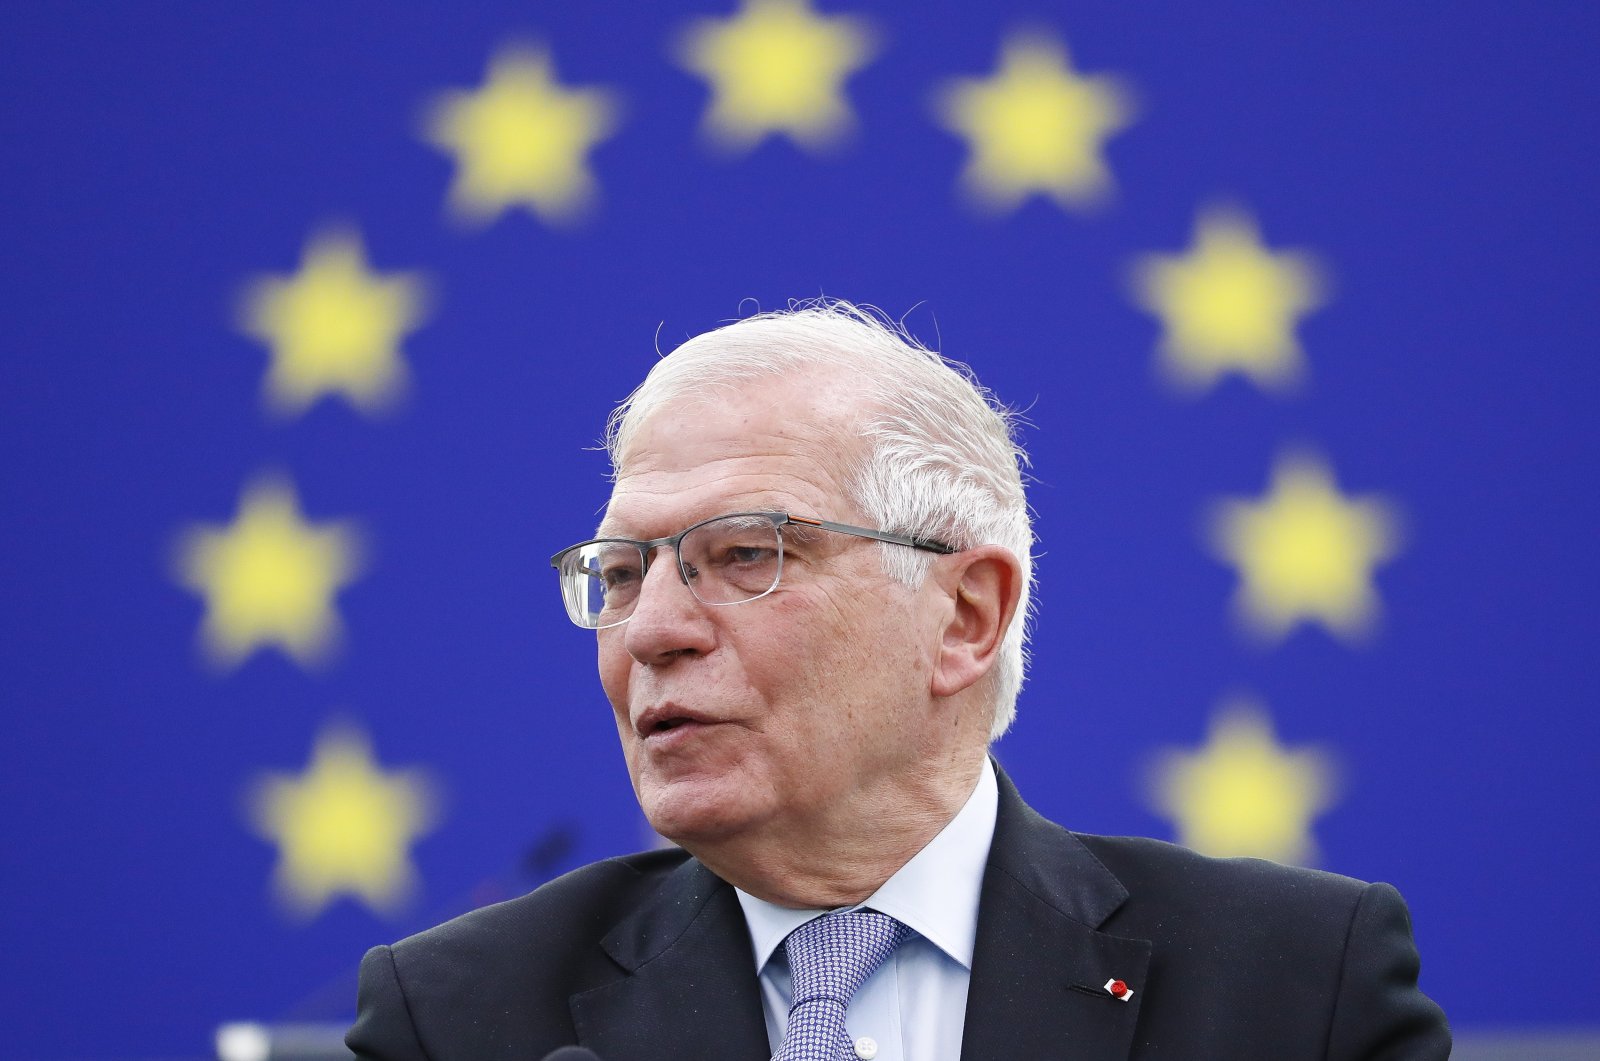 The High representative for the Foreign Affairs of the European Union Josep Borrell delivers a speech on the EU-Russia relations, European security and Russia&#039;s military threat against Ukraine, during a plenary session of the European Parliament in Strasbourg, France, Feb. 16, 2022. (EPA Photo)